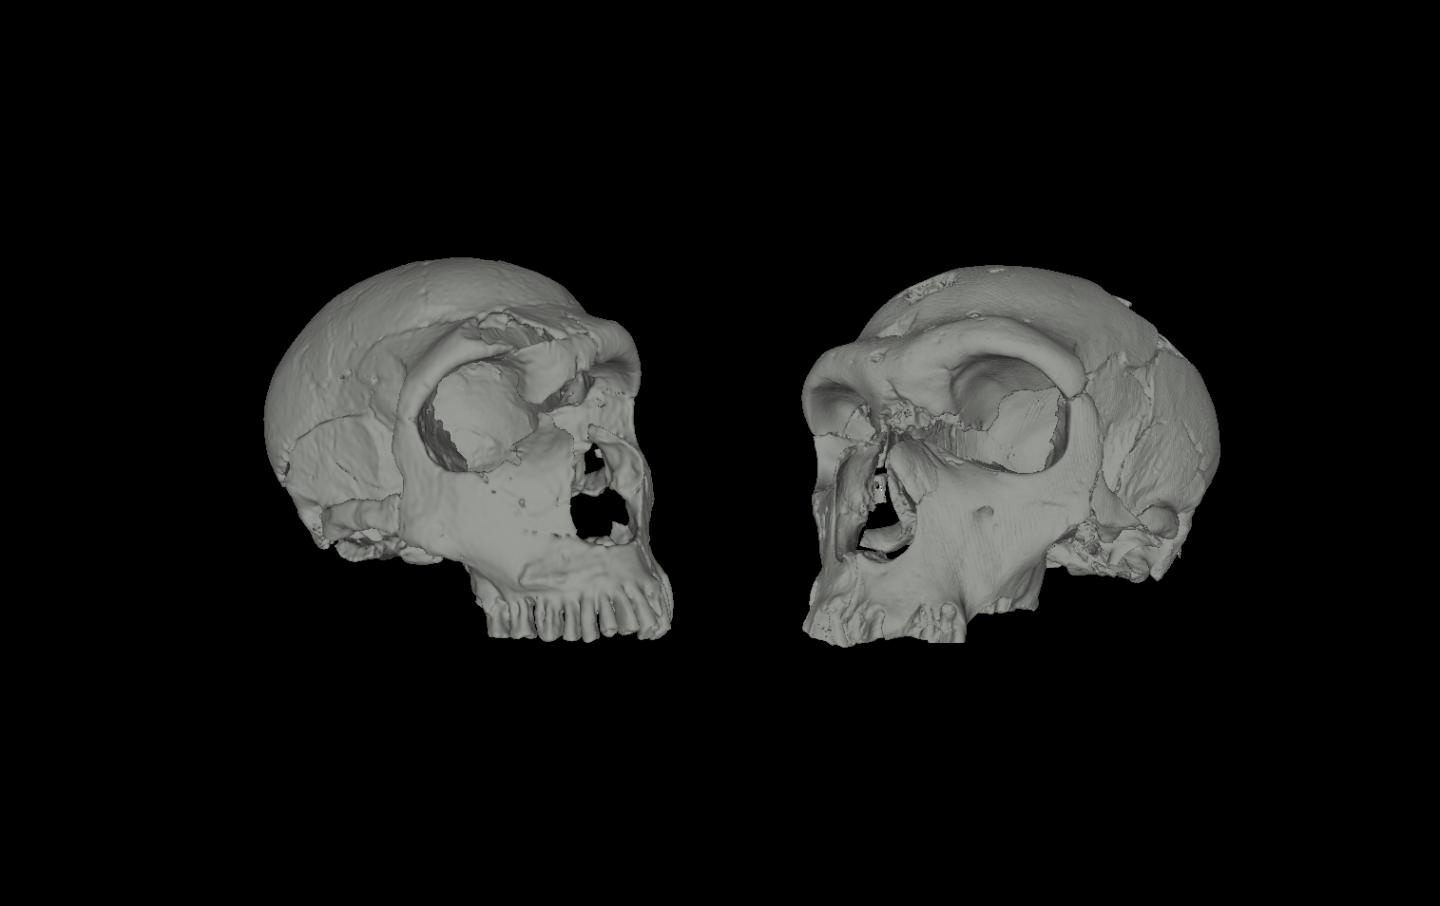 3-D Reconstruction of Neanderthal Skulls Based on CT Scans